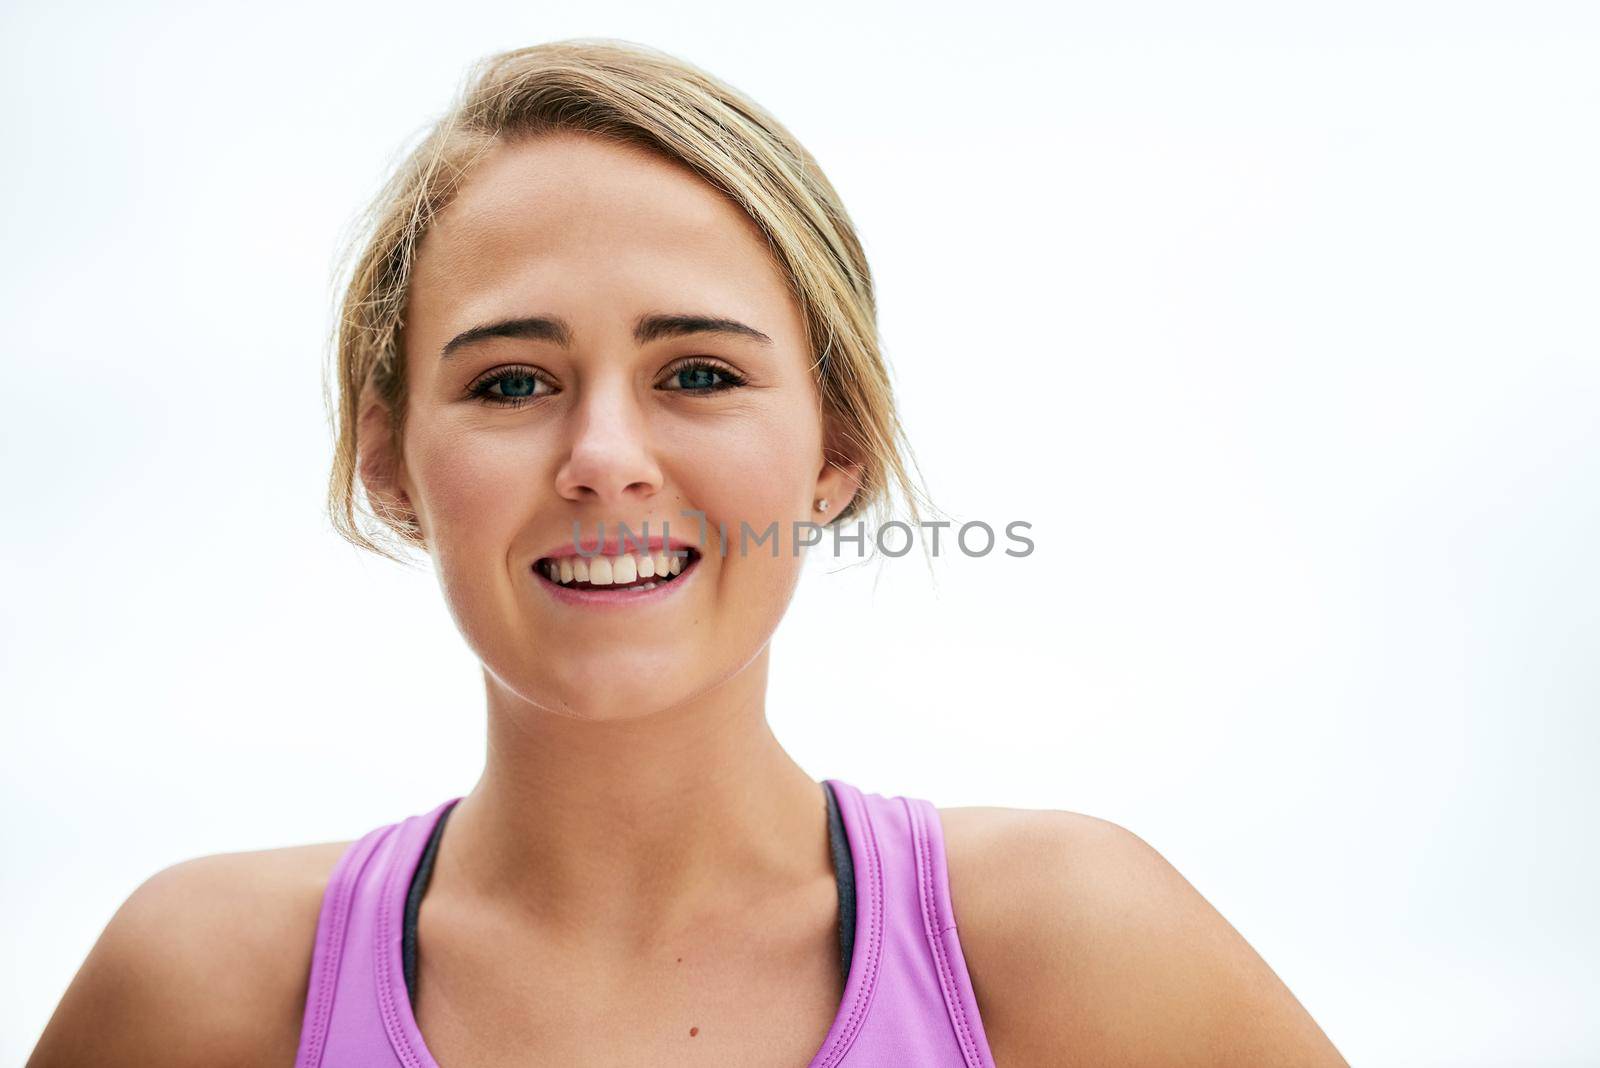 Getting fit gets me in a good mood. Closeup shot of a young woman standing outside